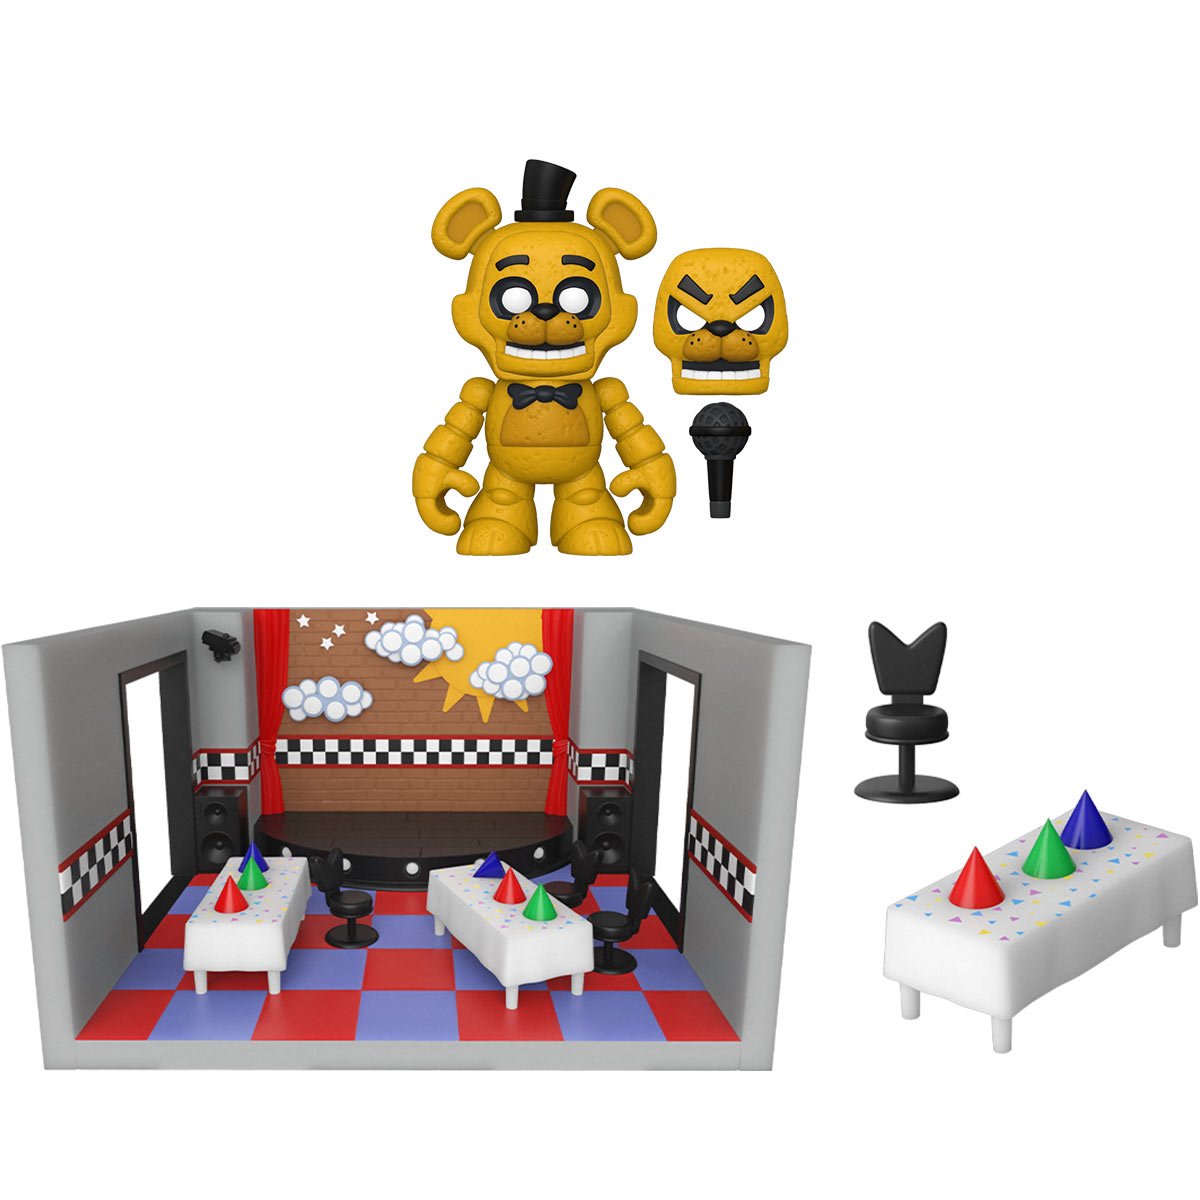 Five Nights At Freddy s Playset Sites unimi it